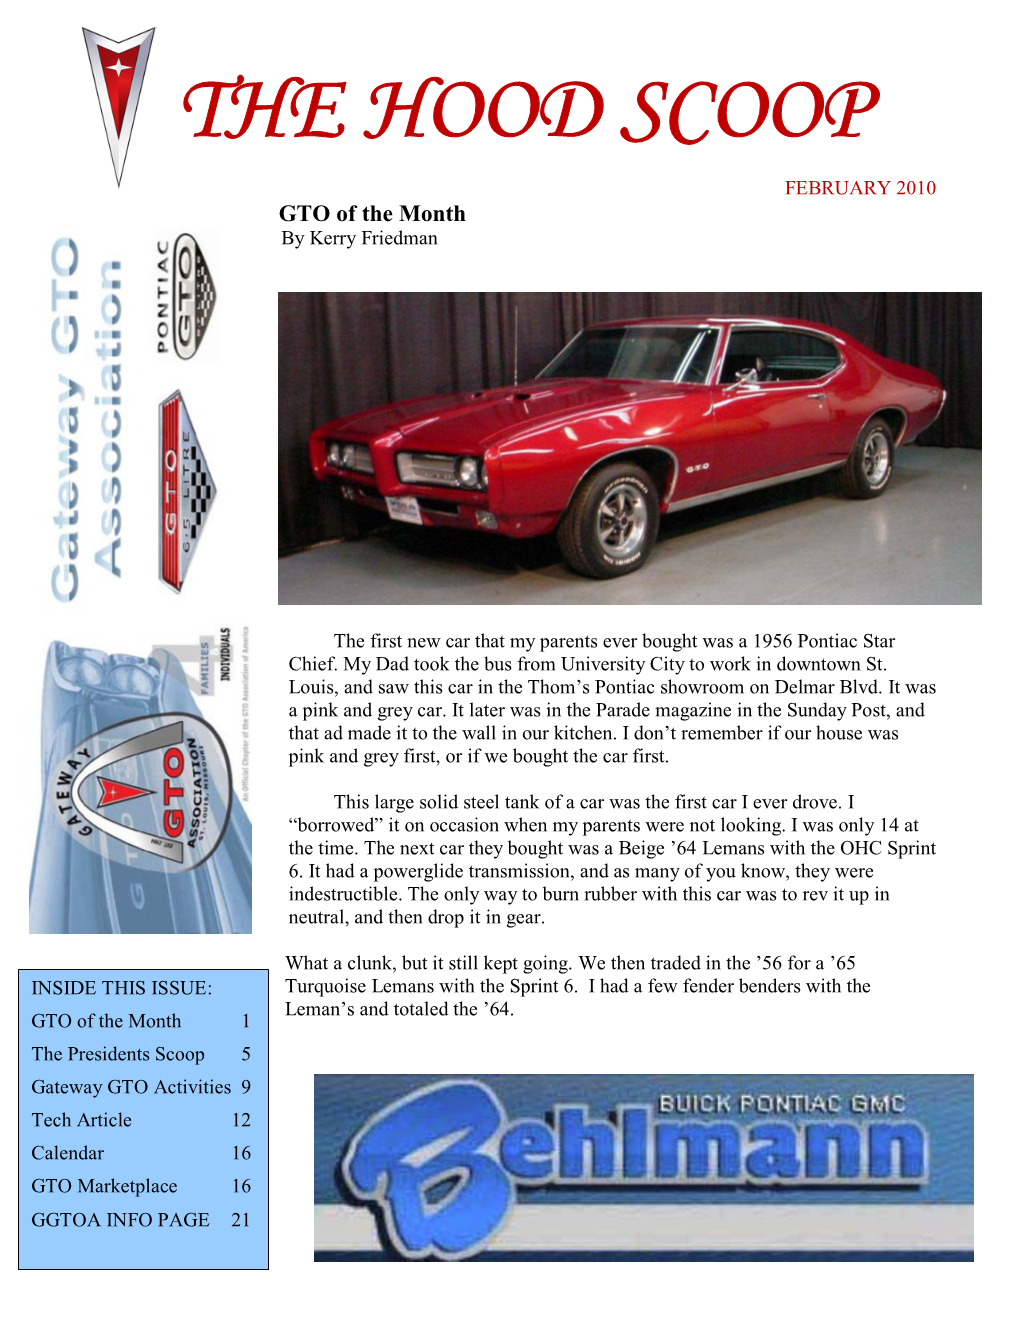 THE HOOD SCOOP FEBRUARY 2010 GTO of the Month by Kerry Friedman